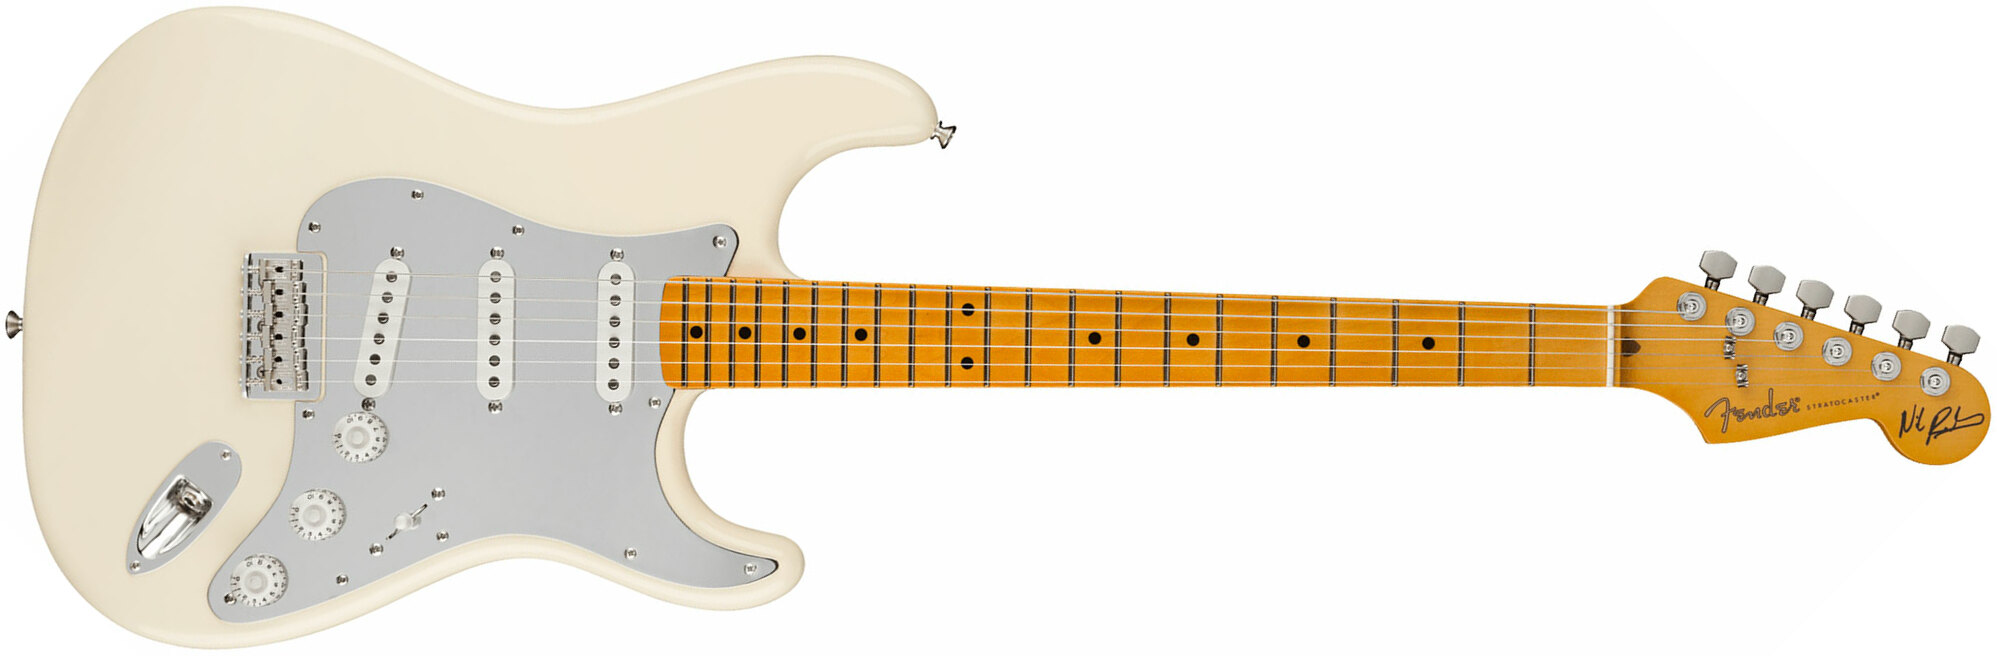 Fender Nile Rodgers Strat Hitmaker Usa Signature 3s Ht Mn - Olympic White - Str shape electric guitar - Main picture